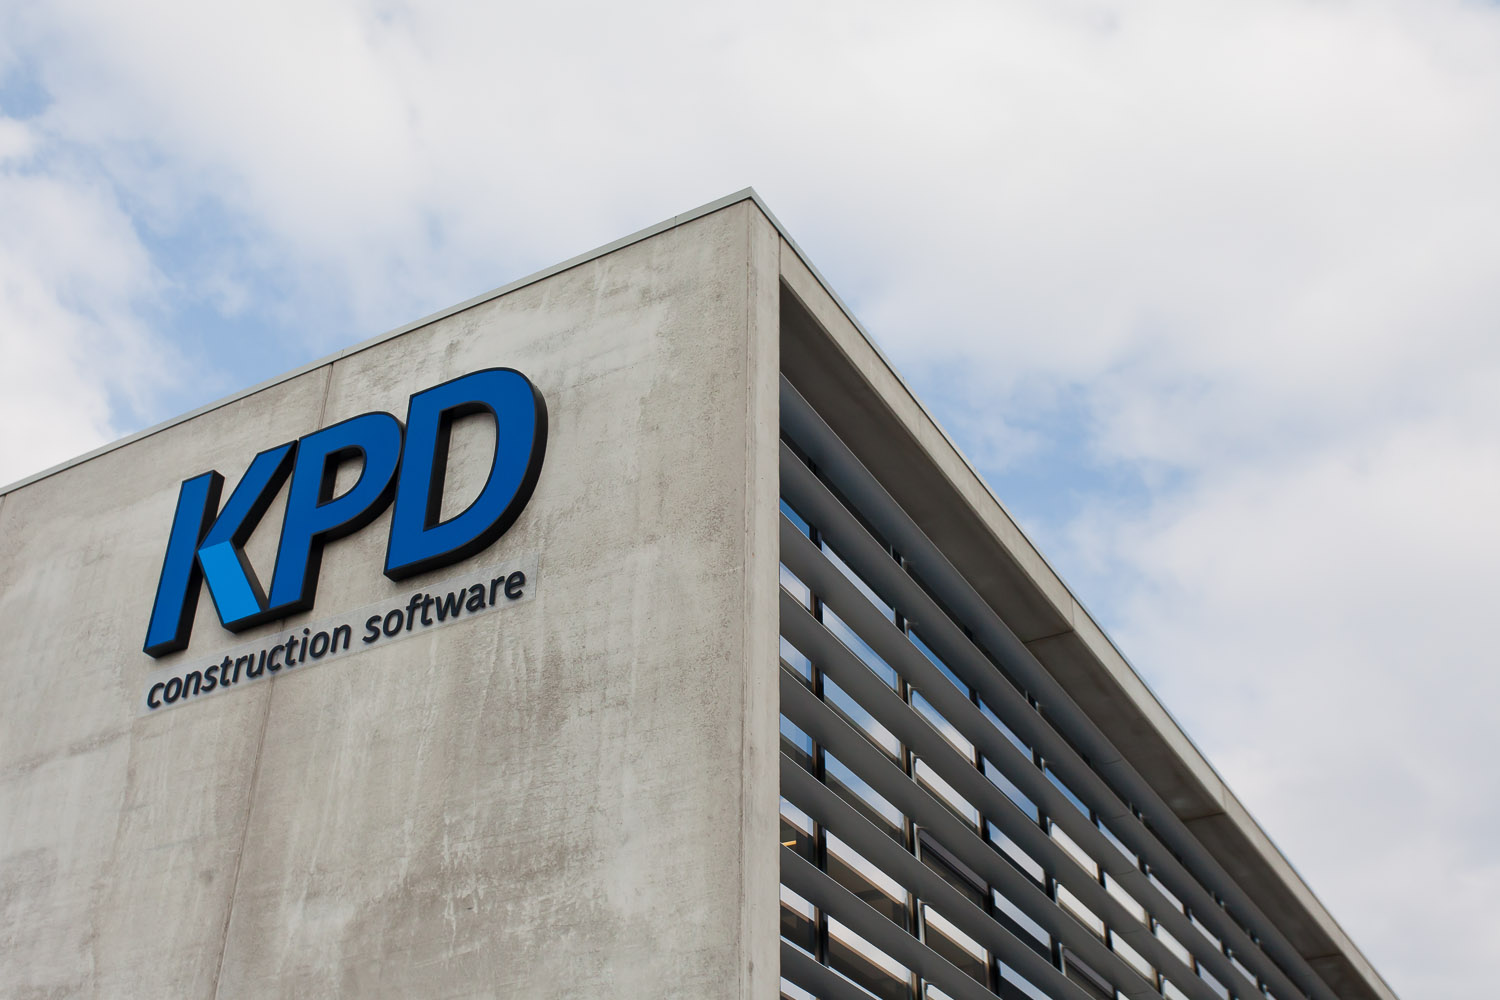 KPD services opts for veeam cloud connect backup